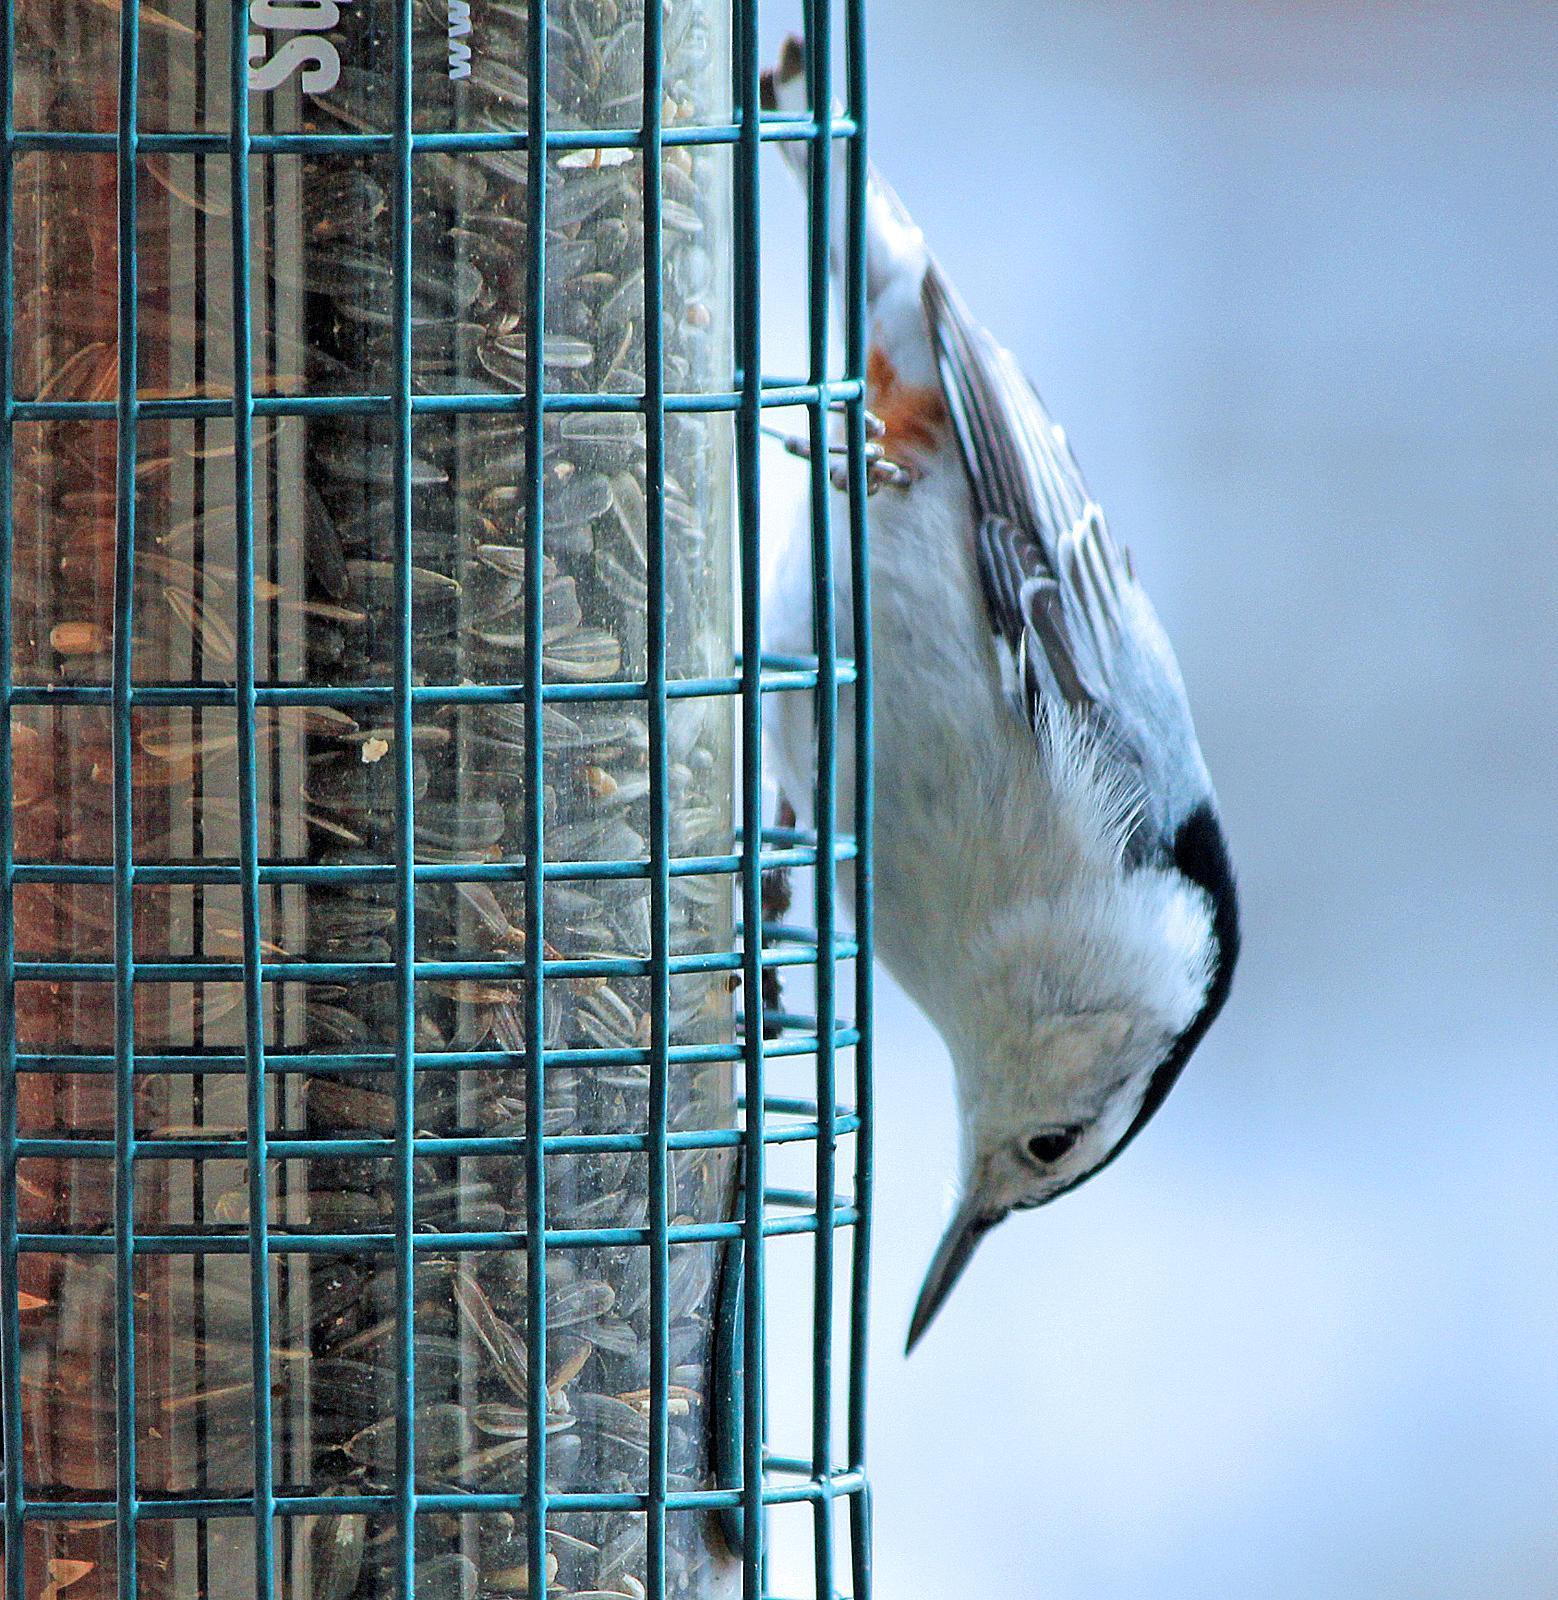 White-breasted Nuthatch Photo by Tom Gannon